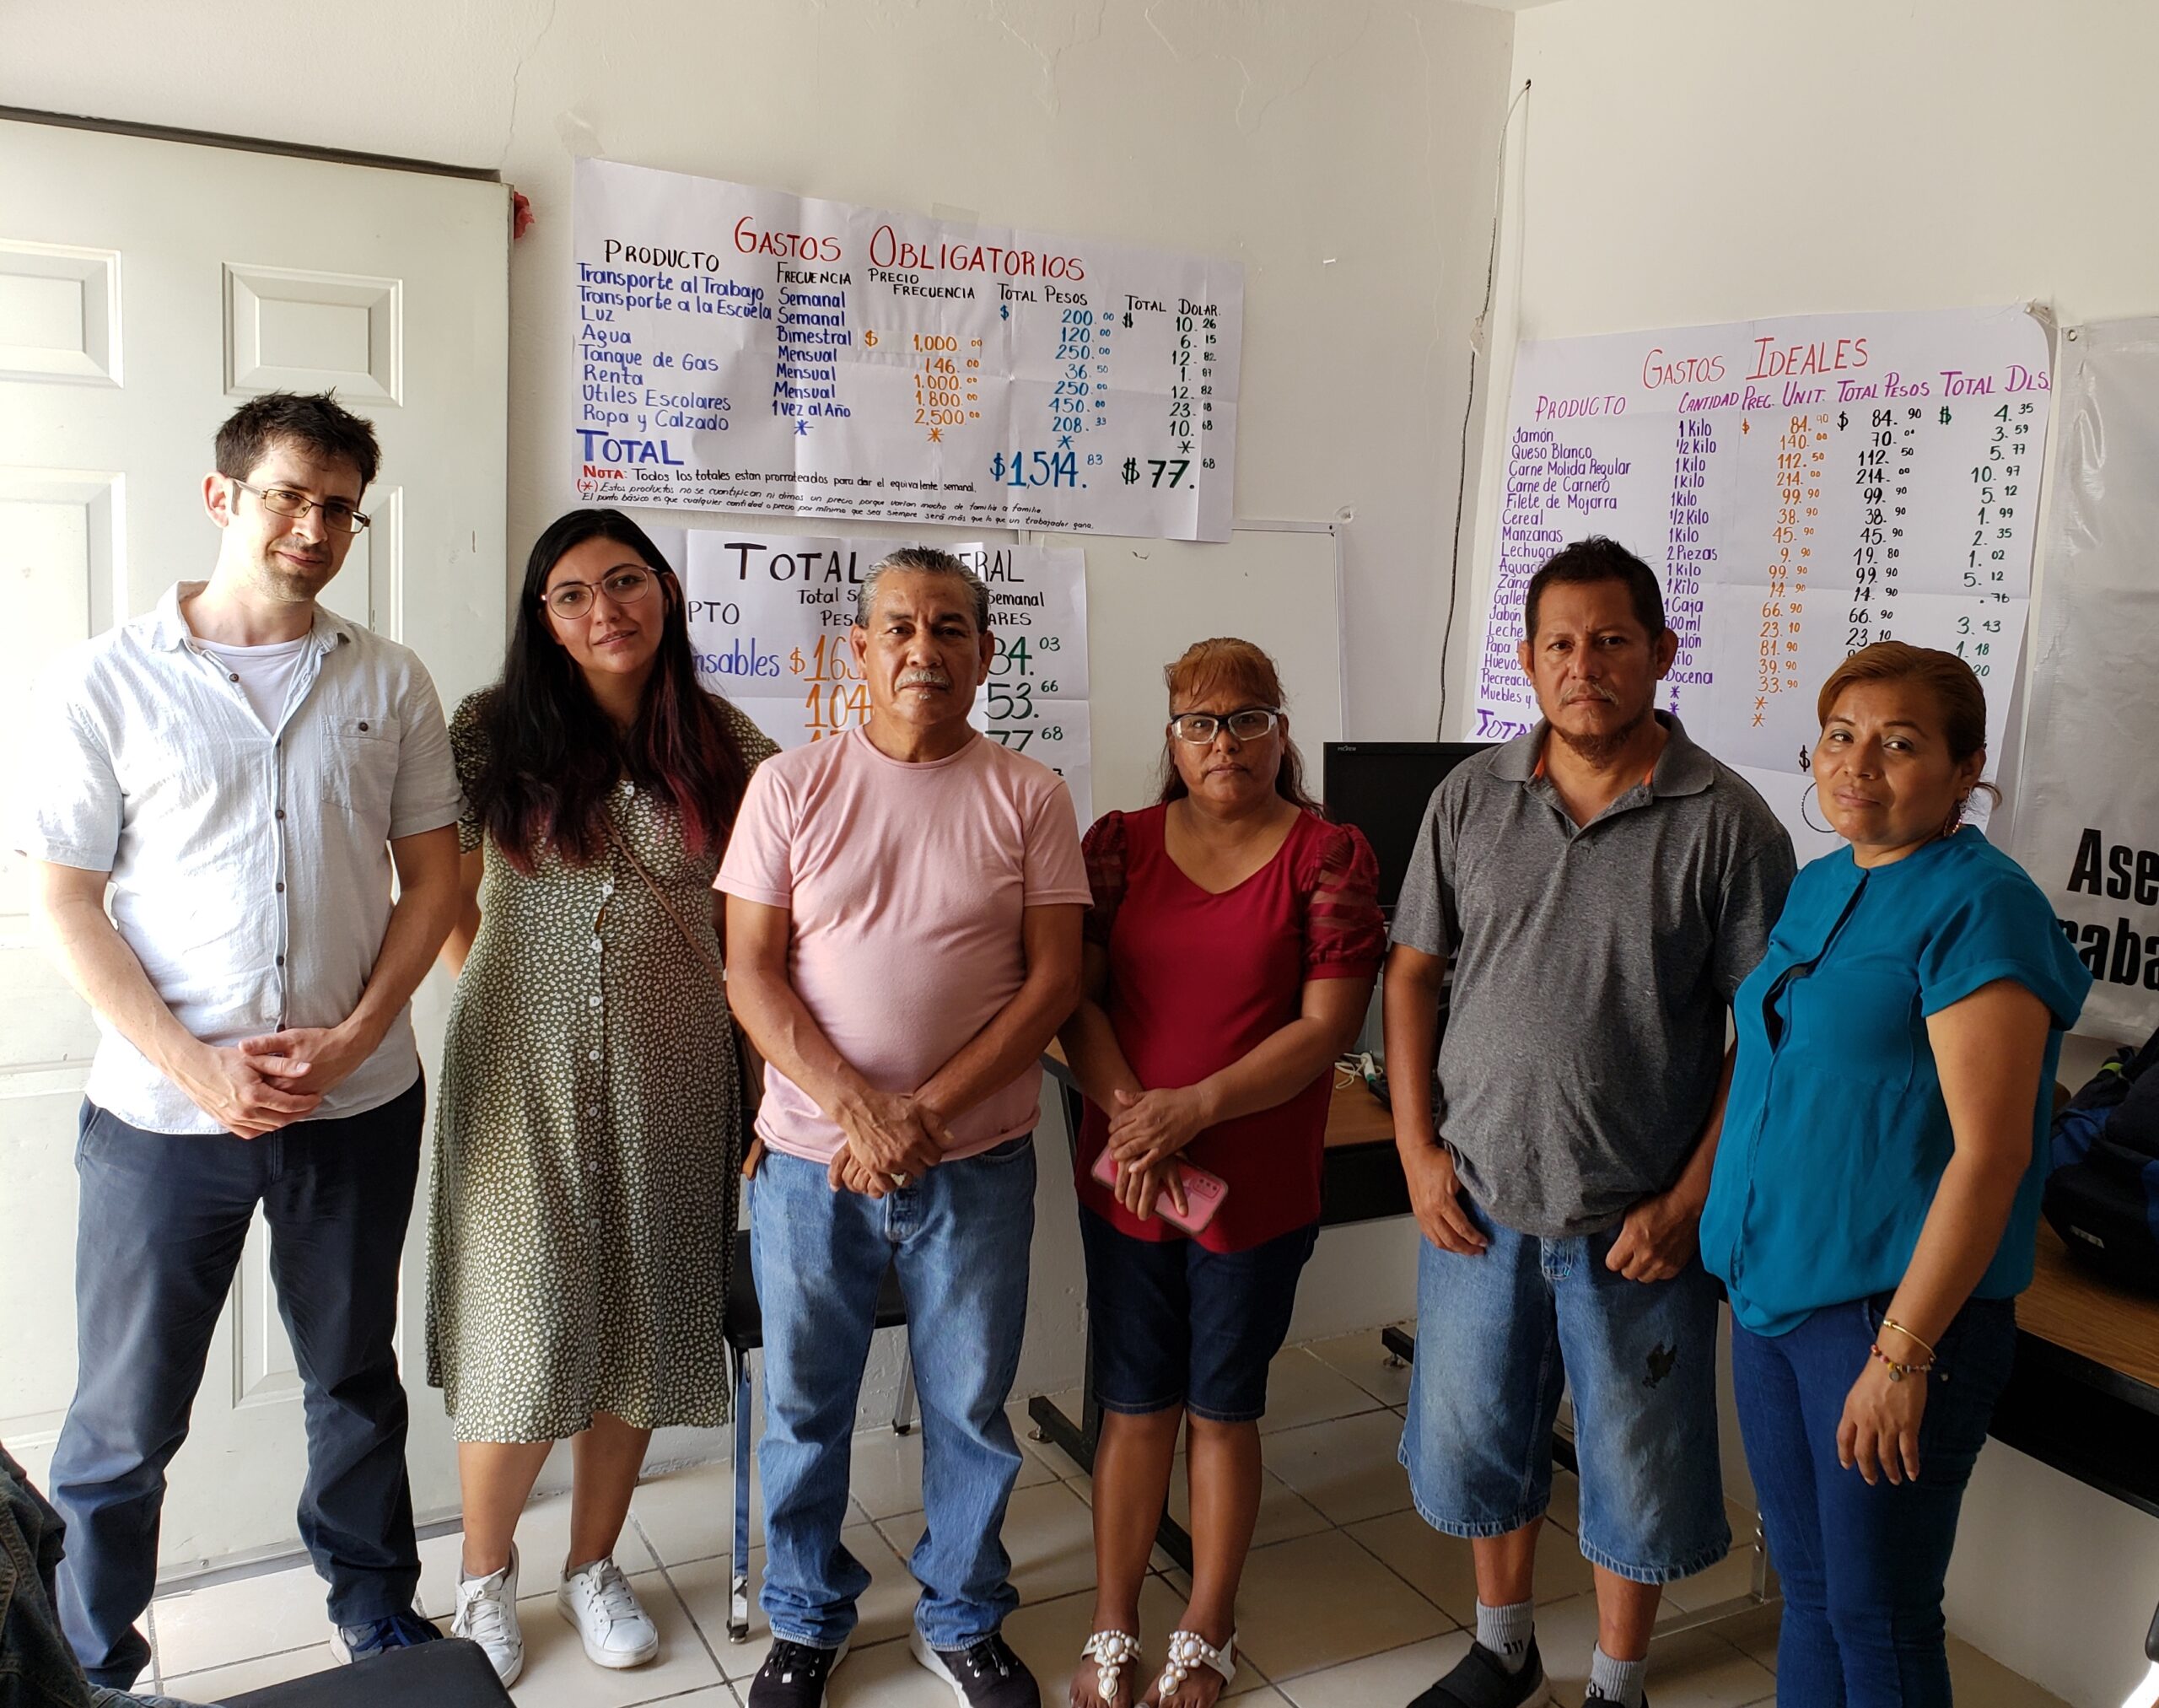 Project meeting with organizers in Ciudad Acuna on US-Mexico